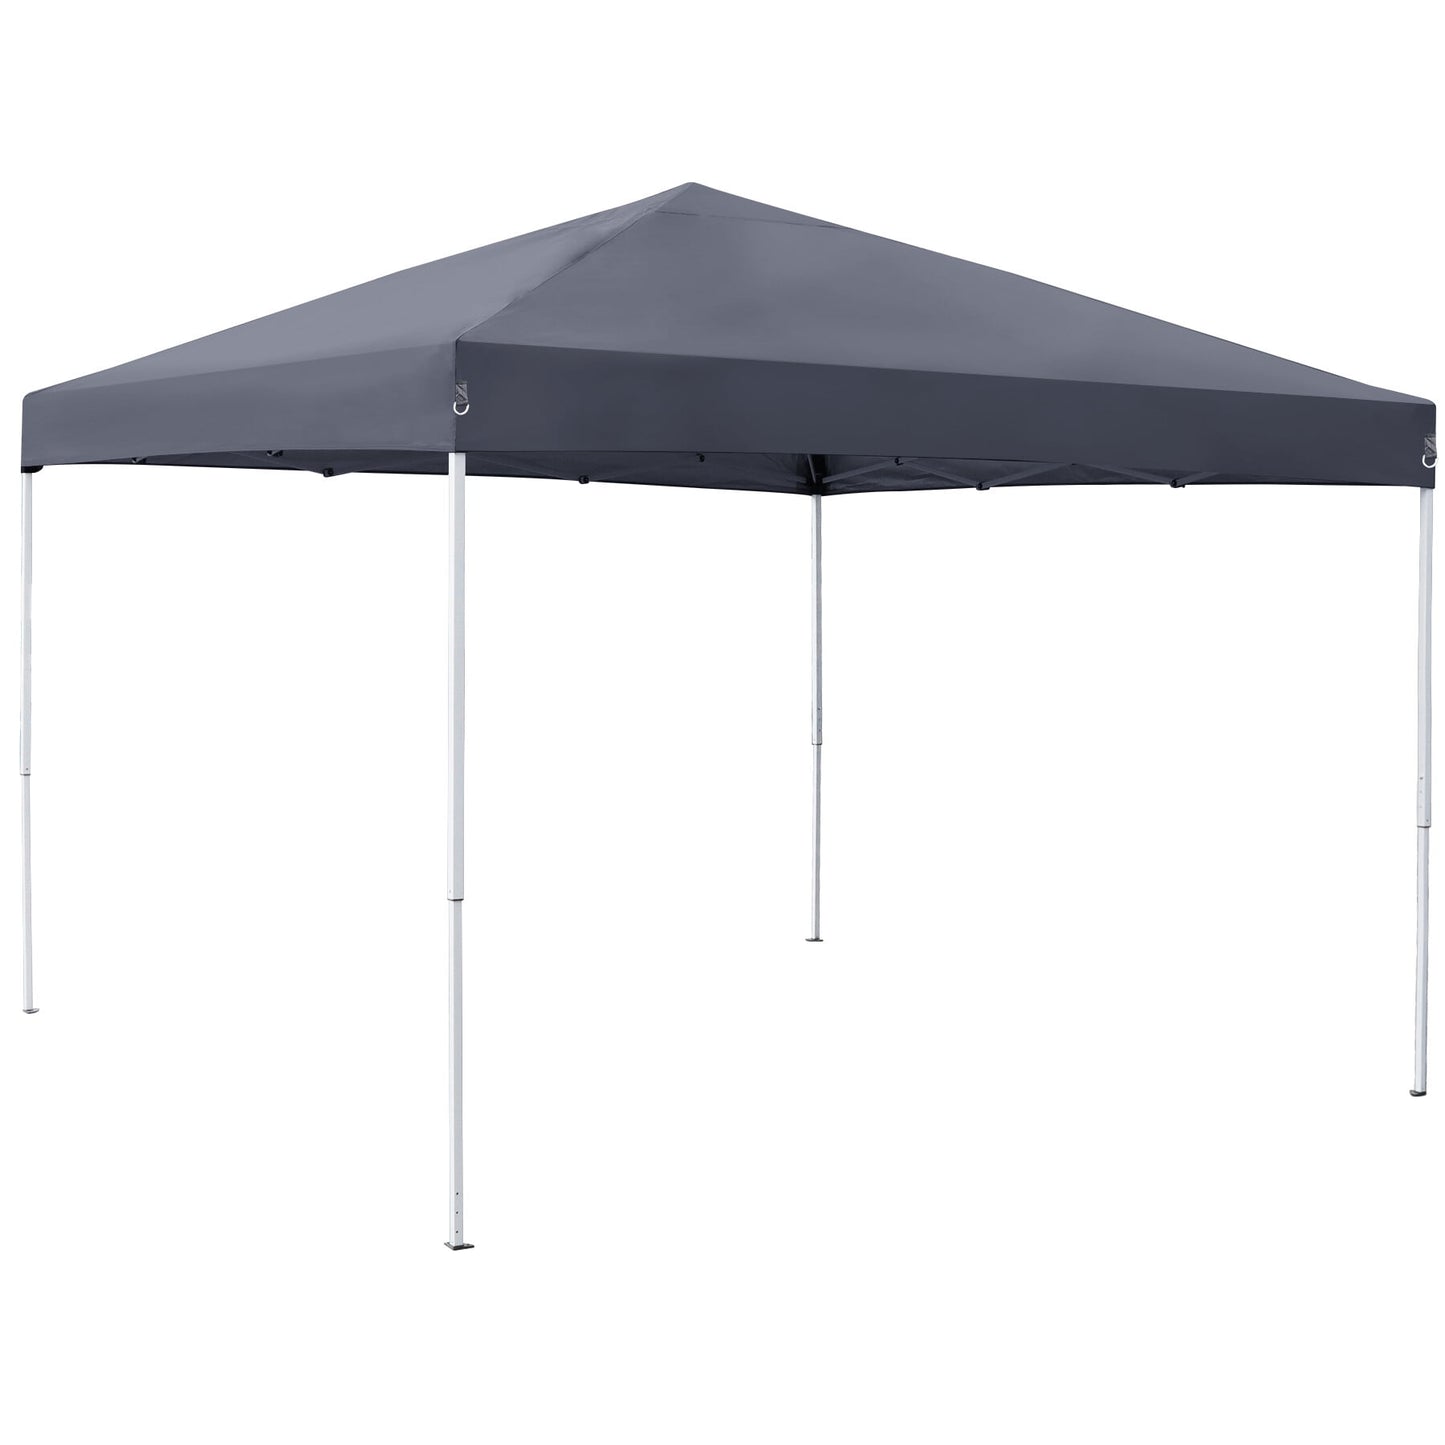 ZENY 10 x 10FT Party Tent Pop-up Canopy Foldable Waterproof Gazebo Tent with Carrying Bag, Gray